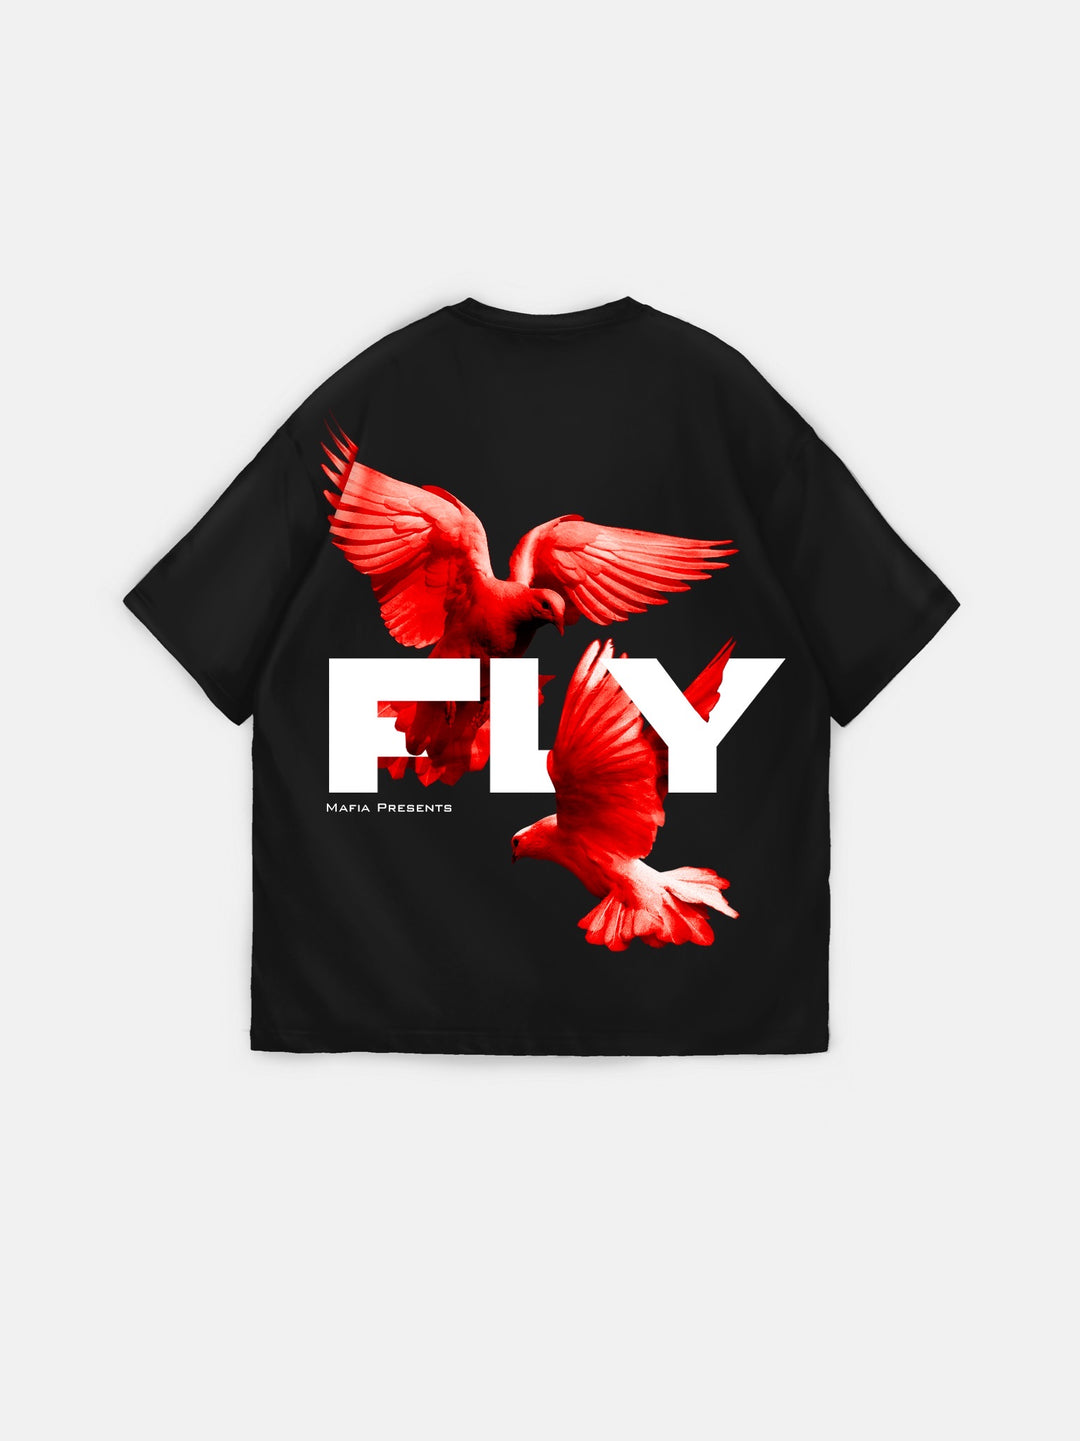 Oversize 'Fly' T-shirt - Black and Red